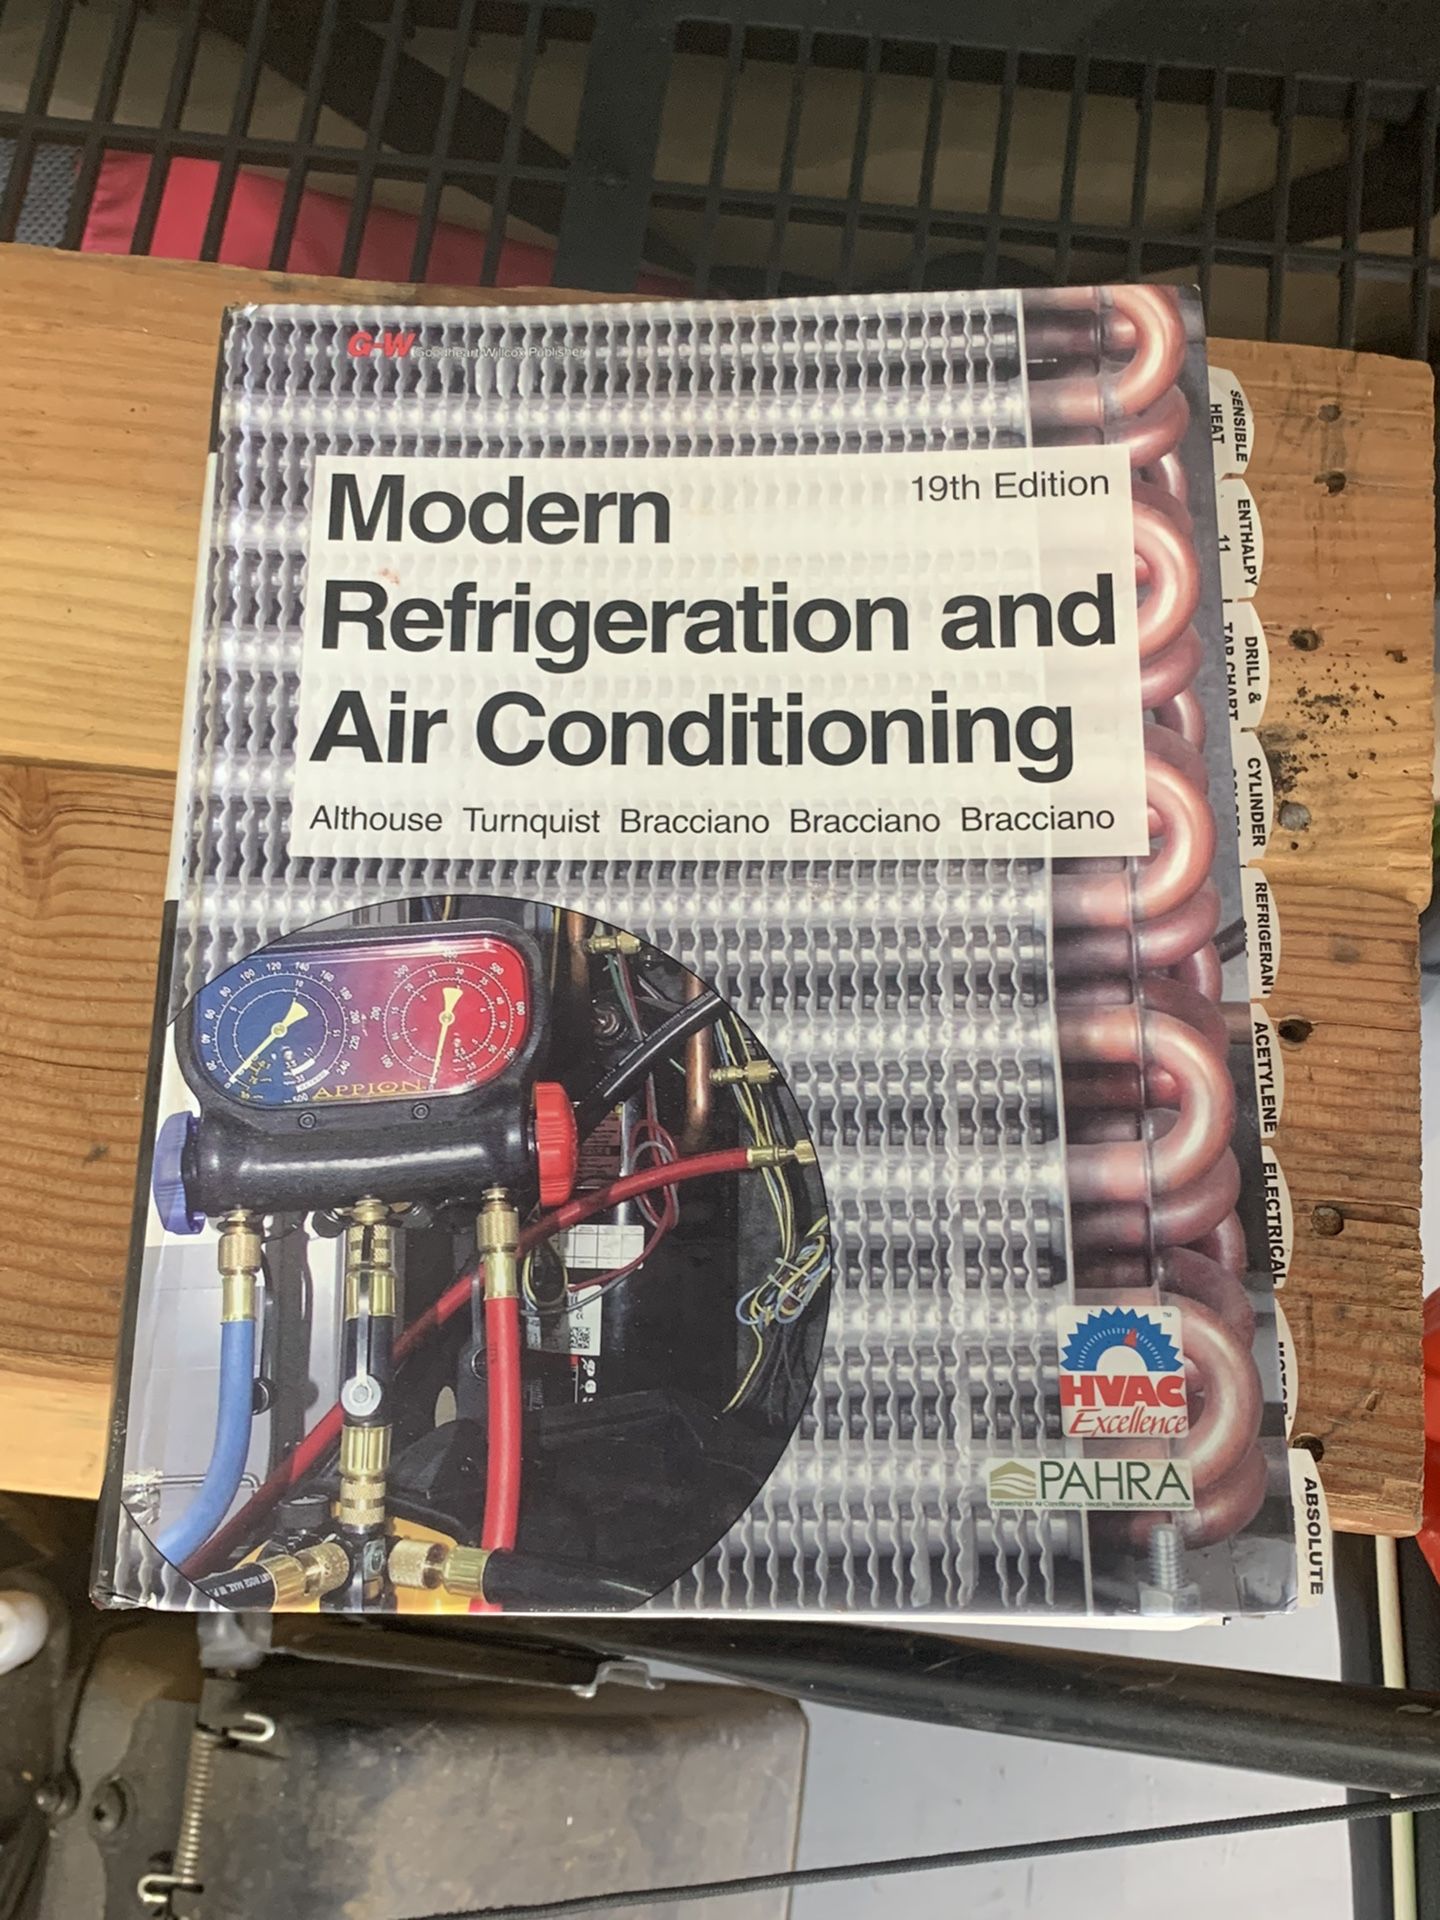 MODERN REFRIGERATION AND AIR CONDITIONING 19th EDITION